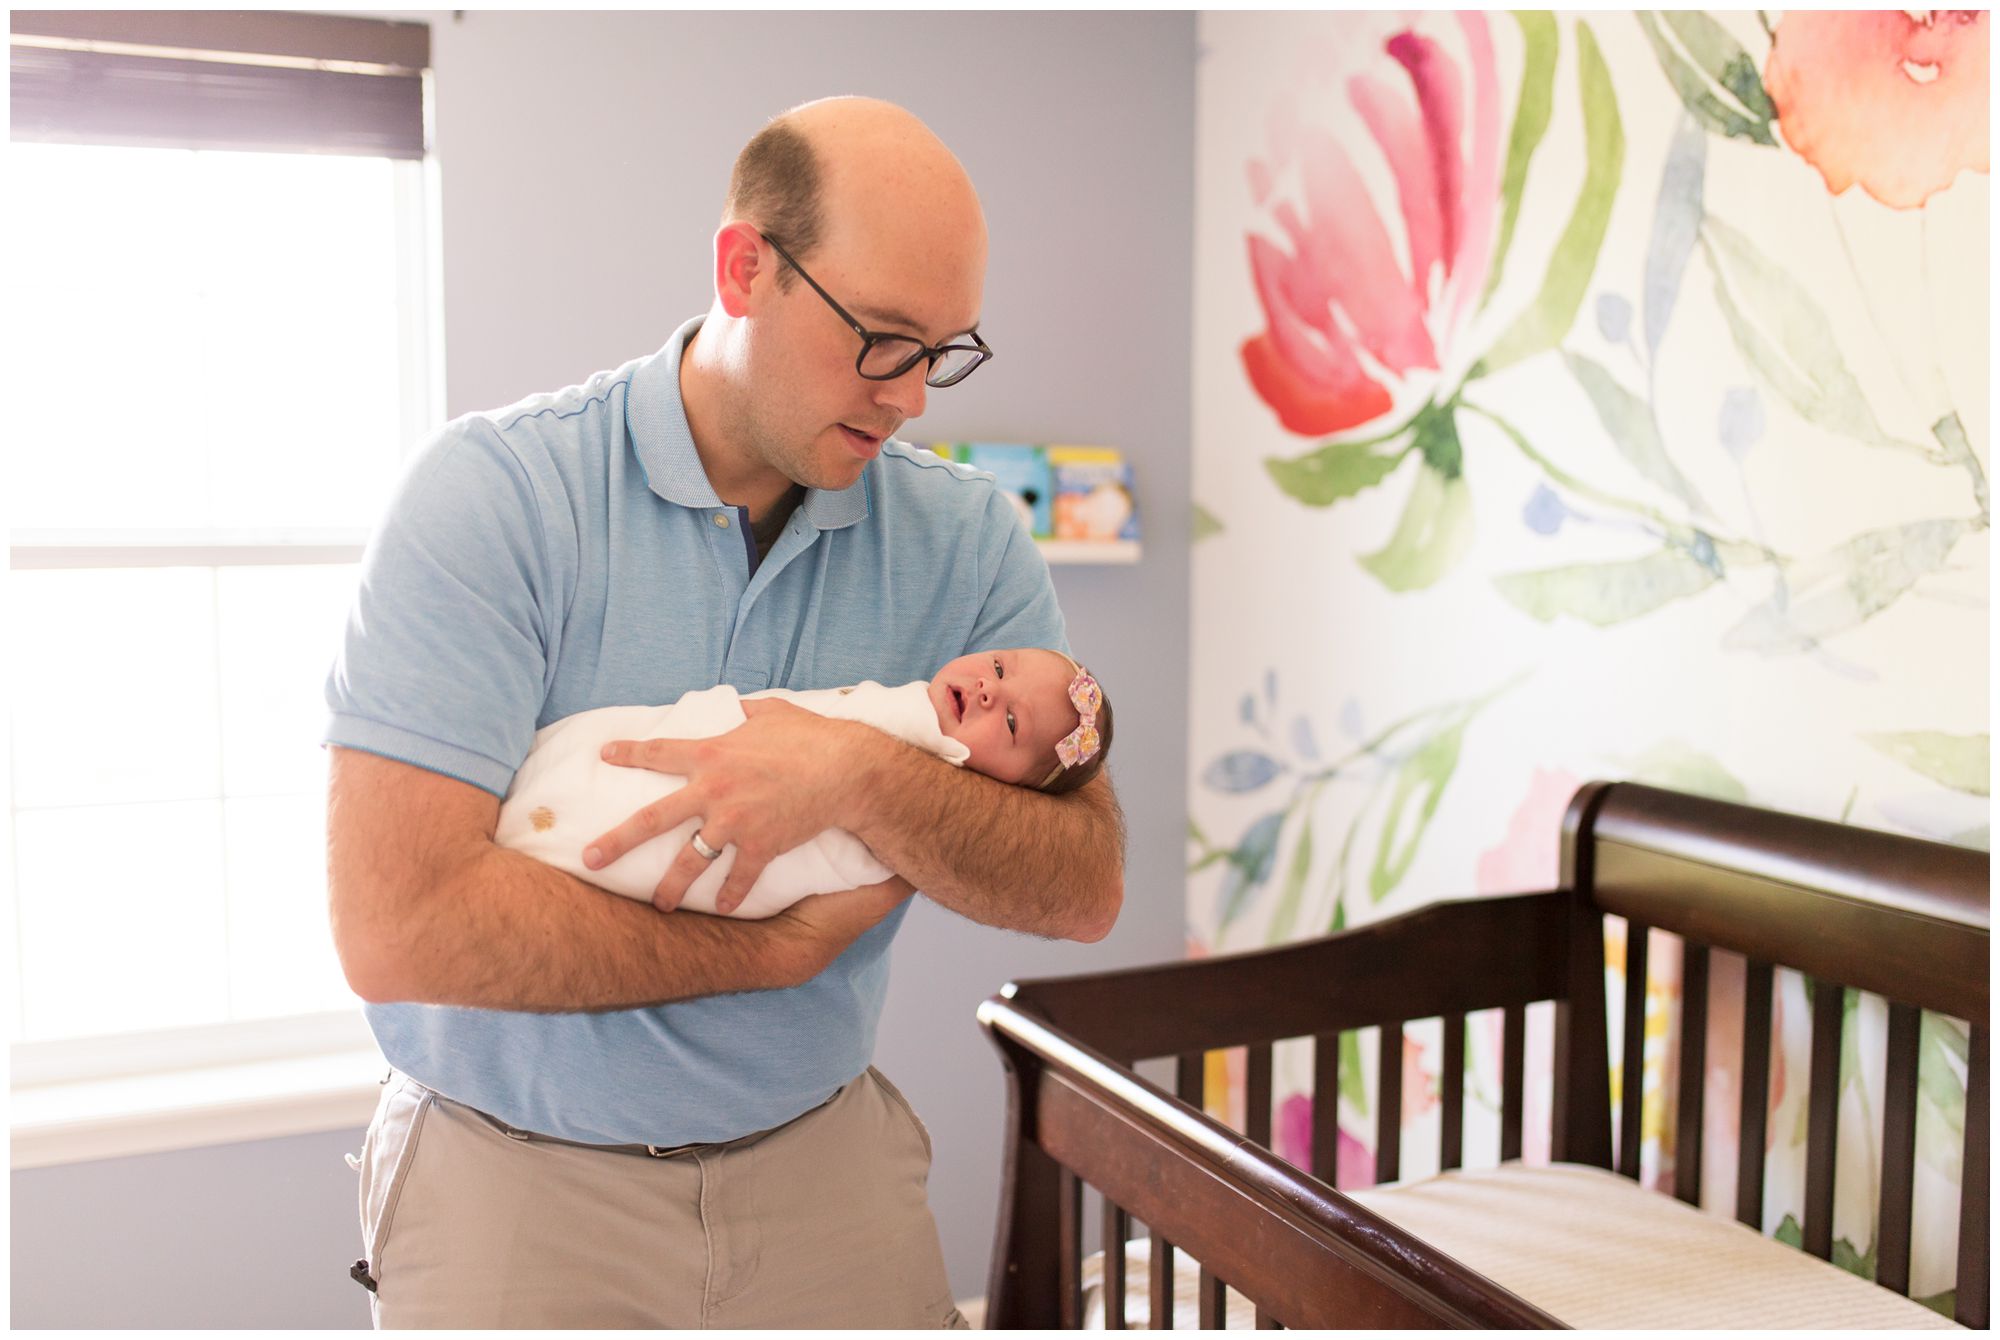 dad swaddles newborn baby in Westfield Indiana nursery during photo session